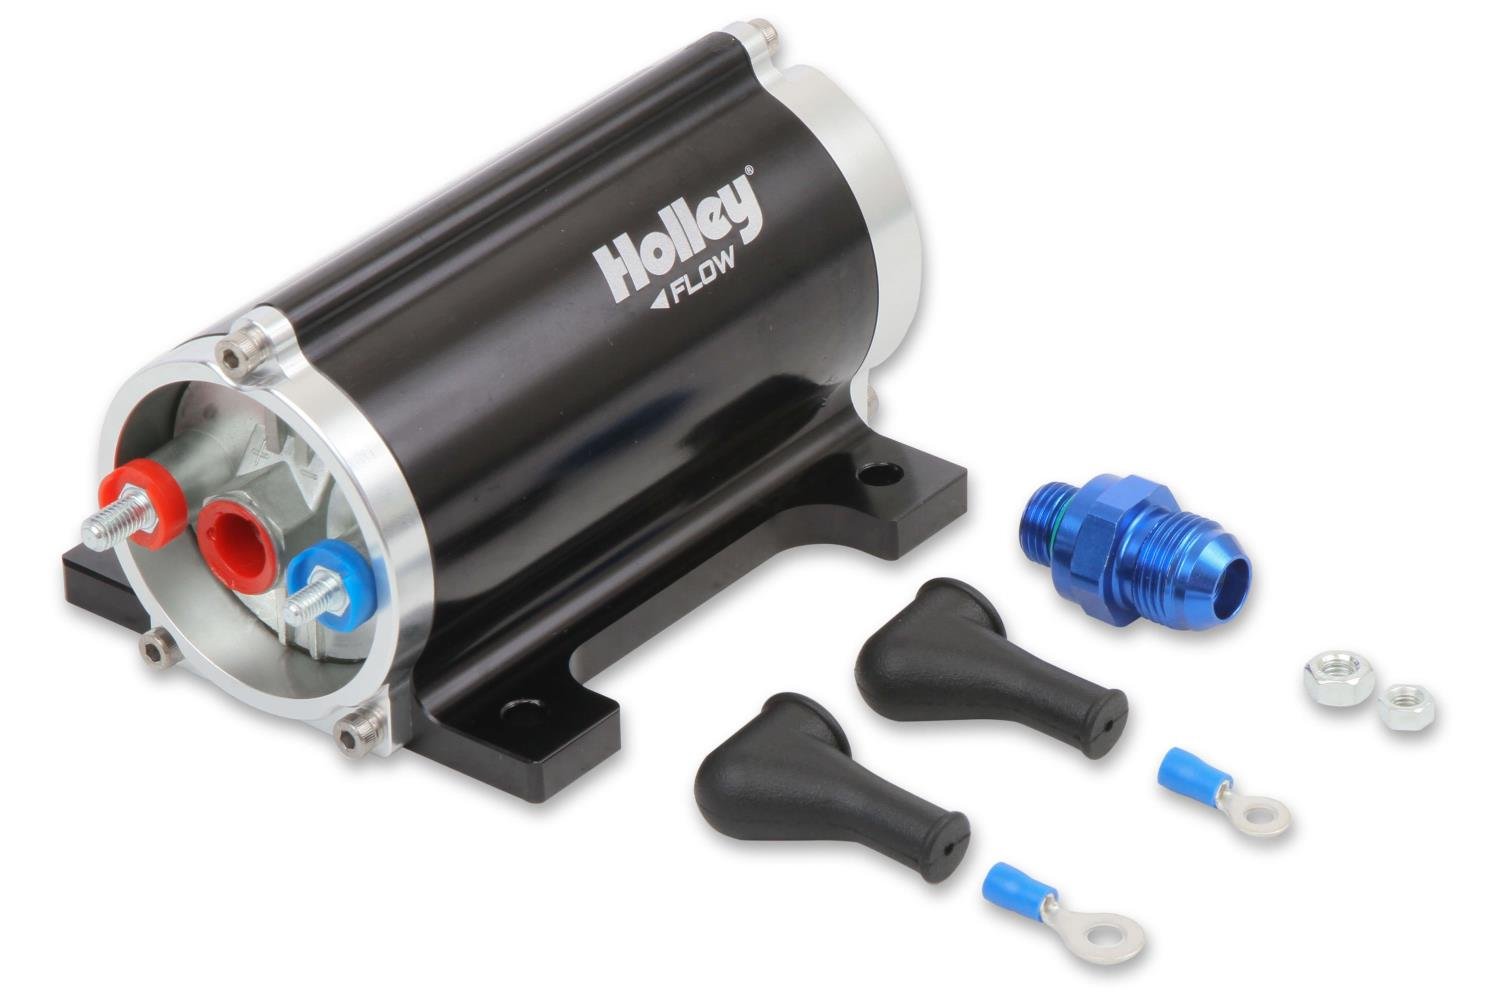 12-170 Universal In-Line Electric Fuel Pump 100 GPH @ 8 PSI